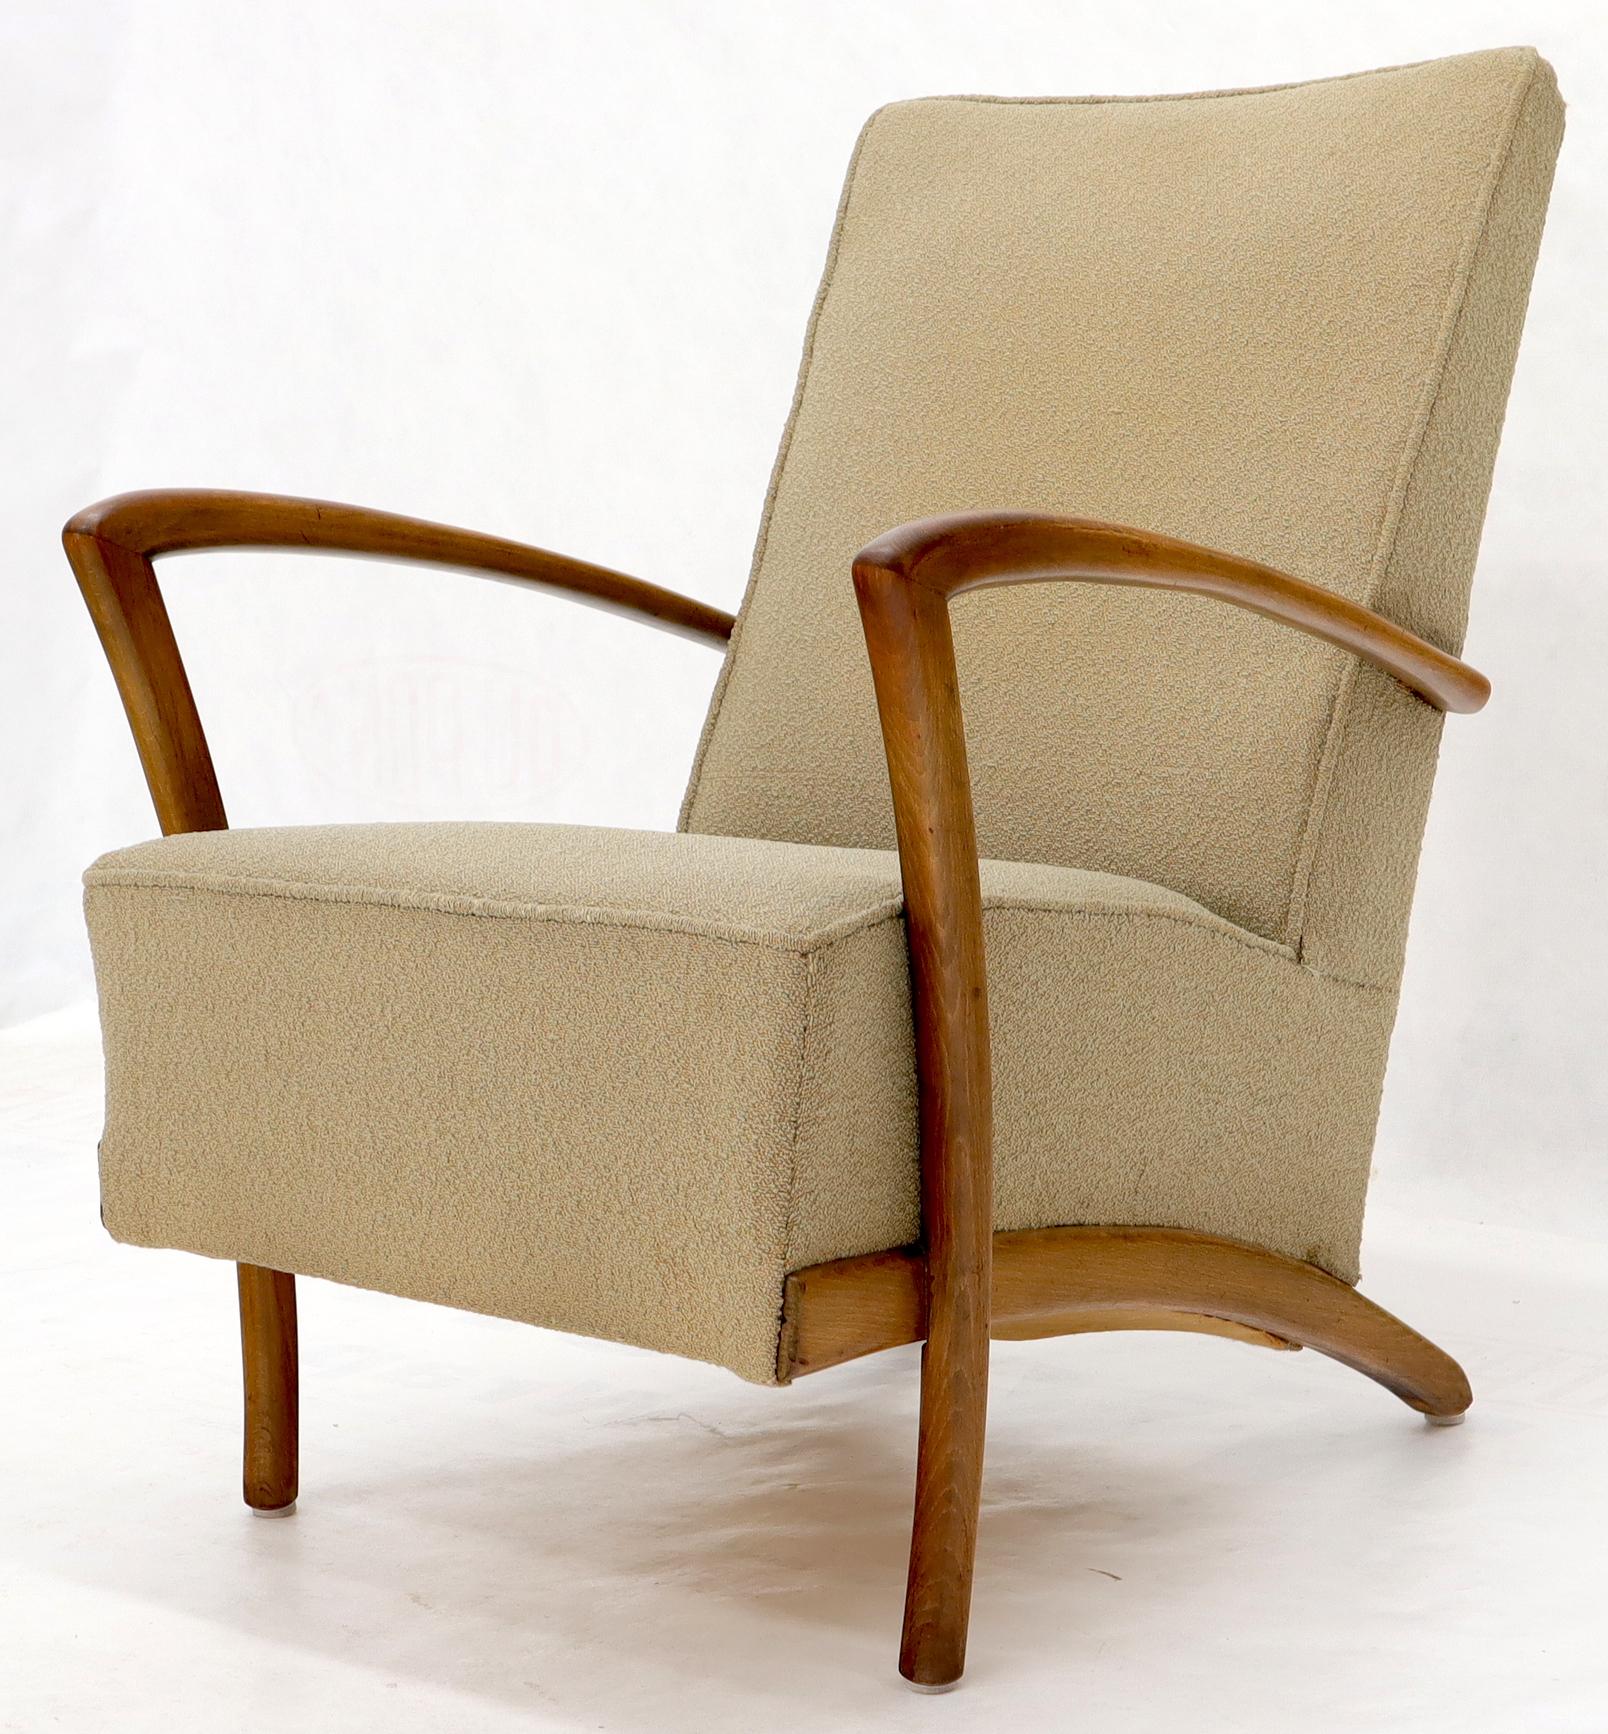 20th Century Pair of Italian Spring Loaded Seats Lounge Chairs